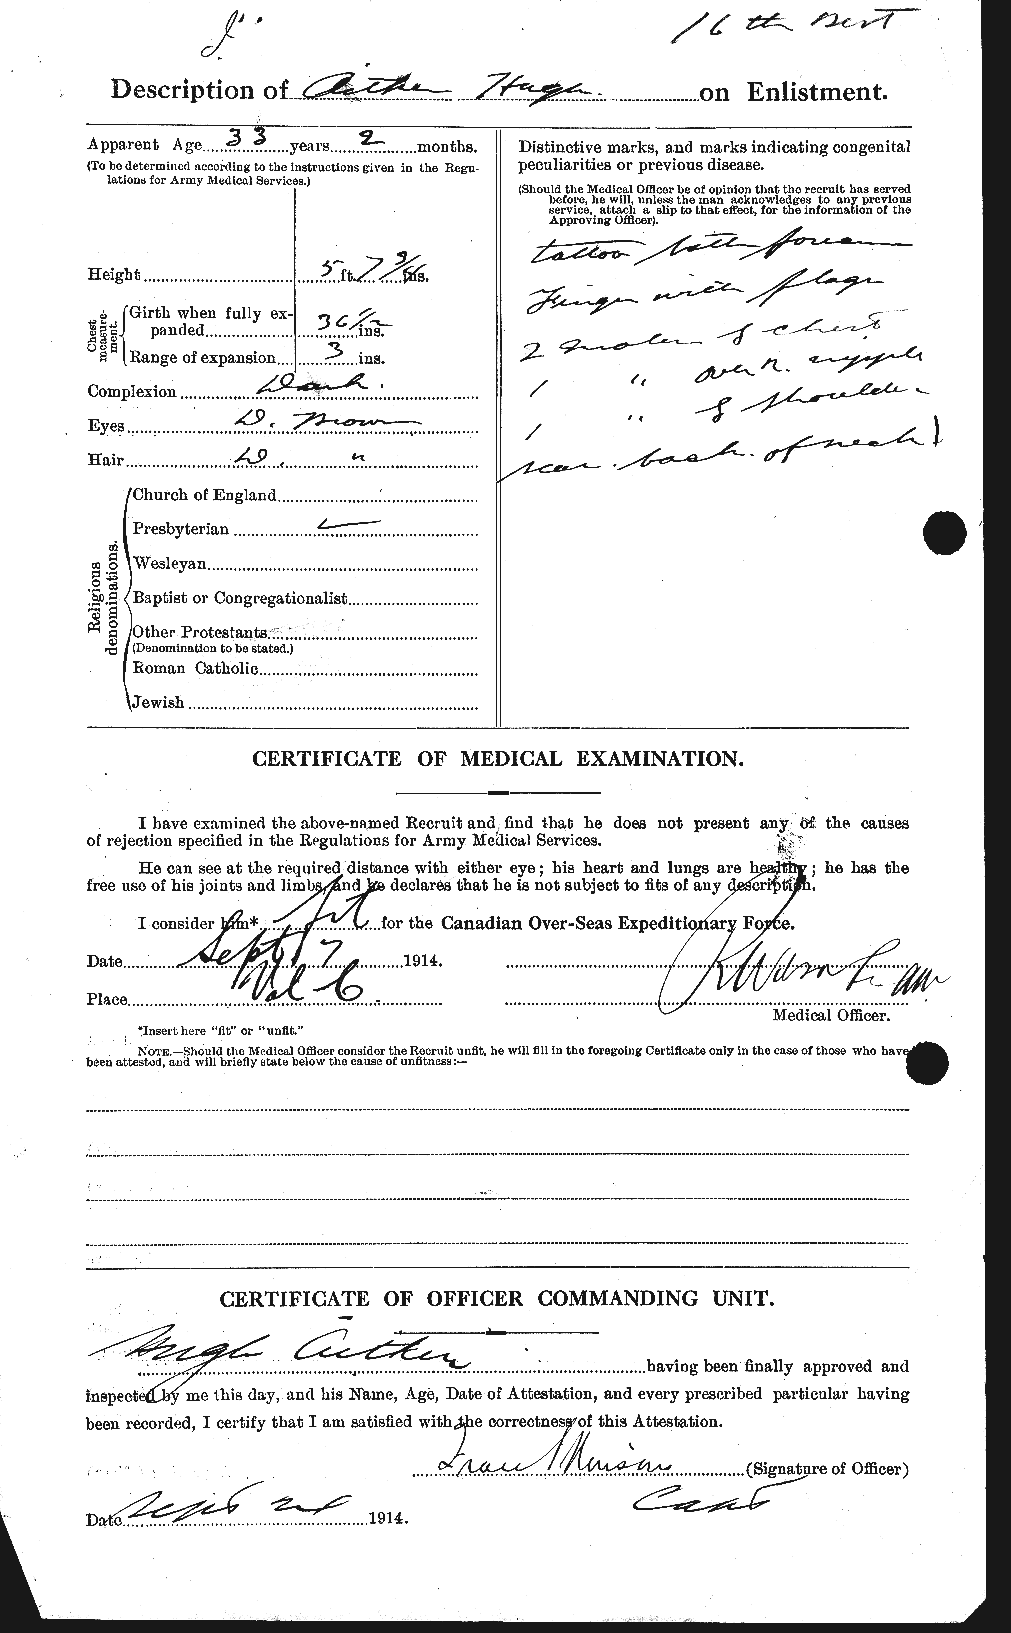 Personnel Records of the First World War - CEF 203372b